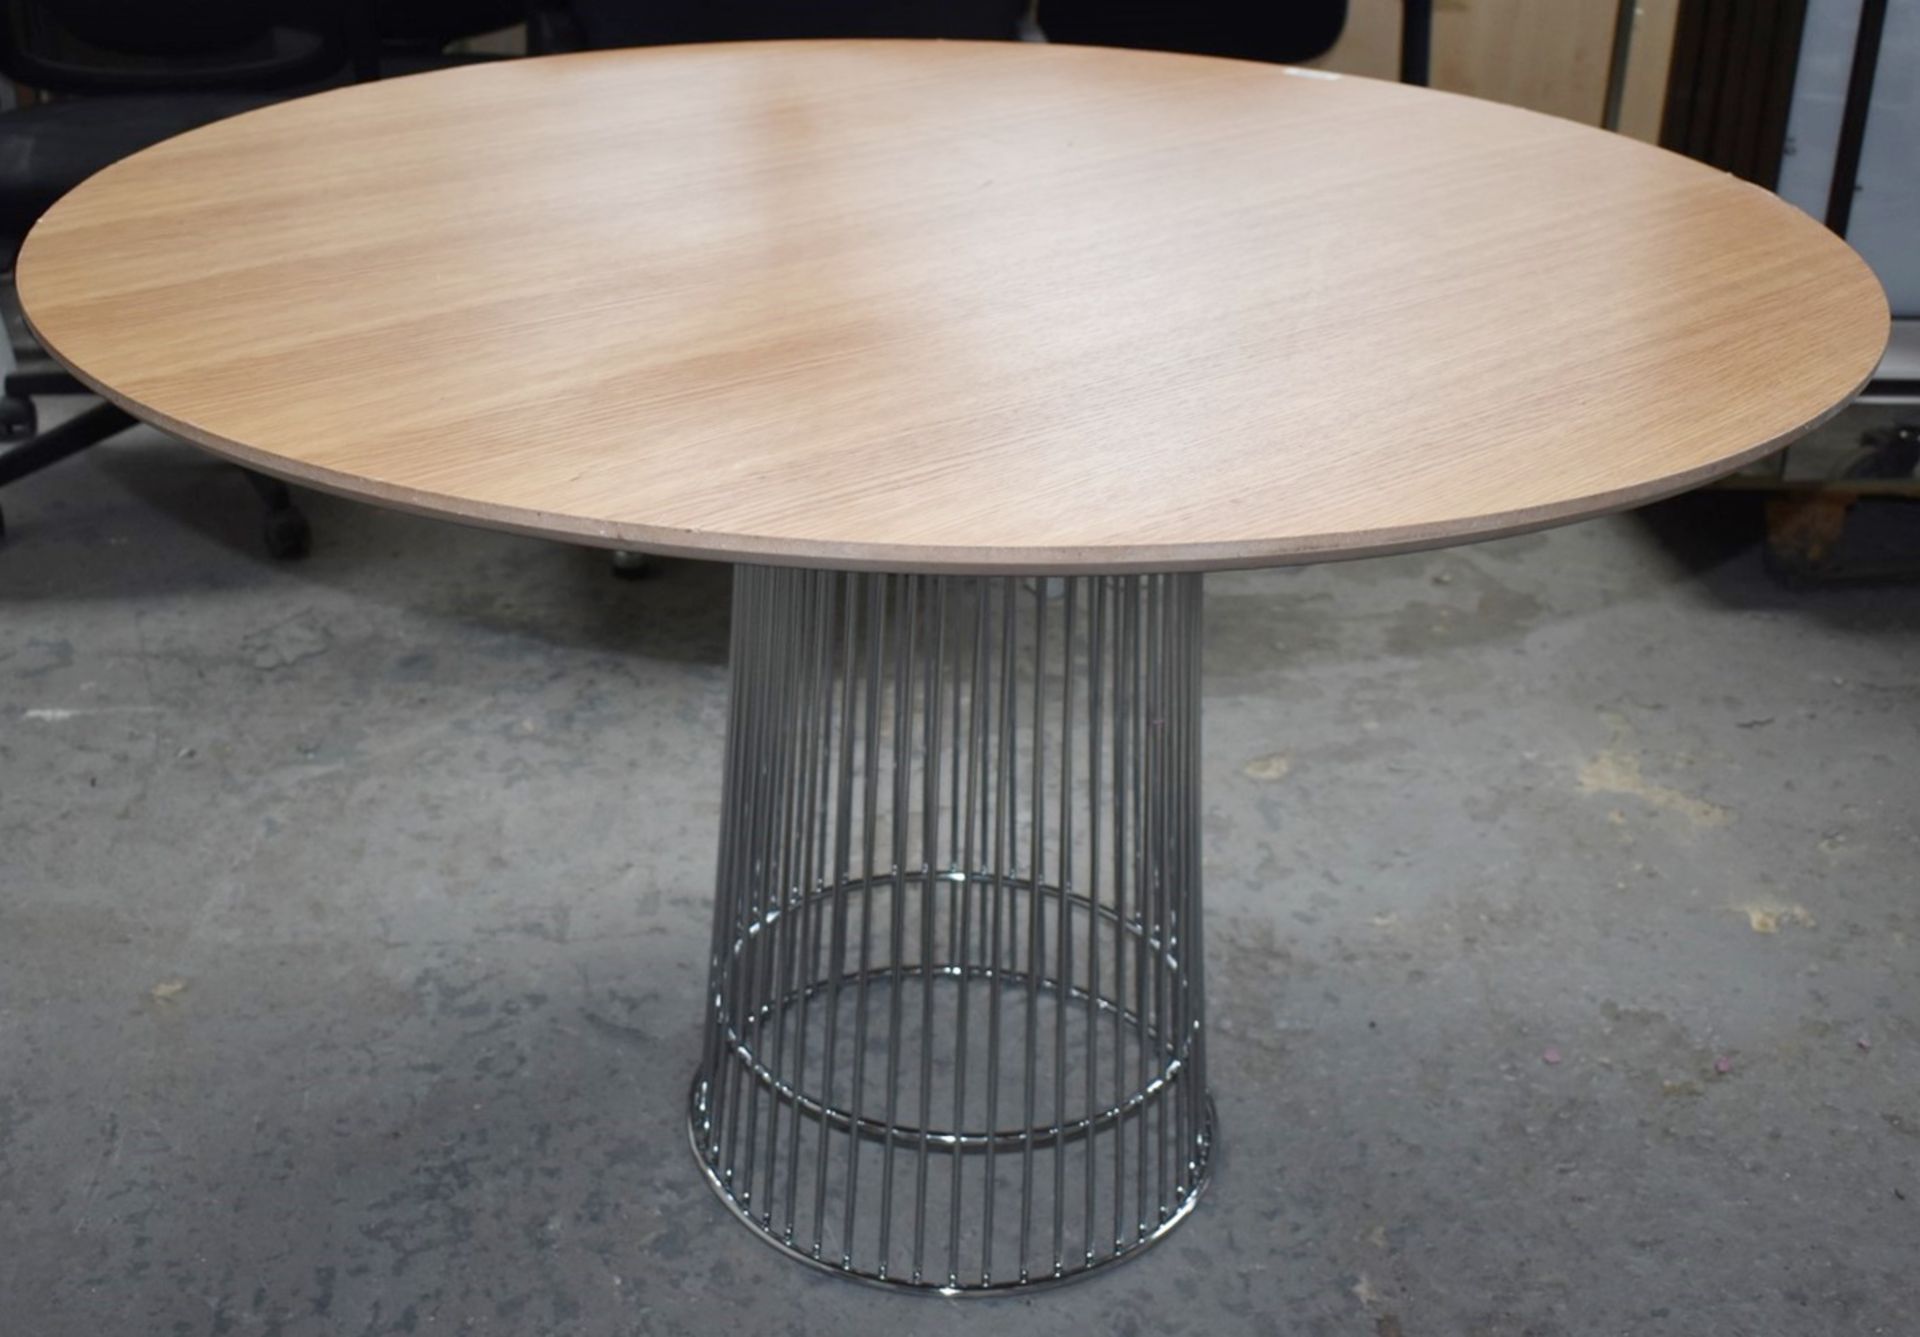 1 x Temahome Dining Table With a Large Round Table Top and Stylish Chrome Base - 150cm Diameter - Image 10 of 13